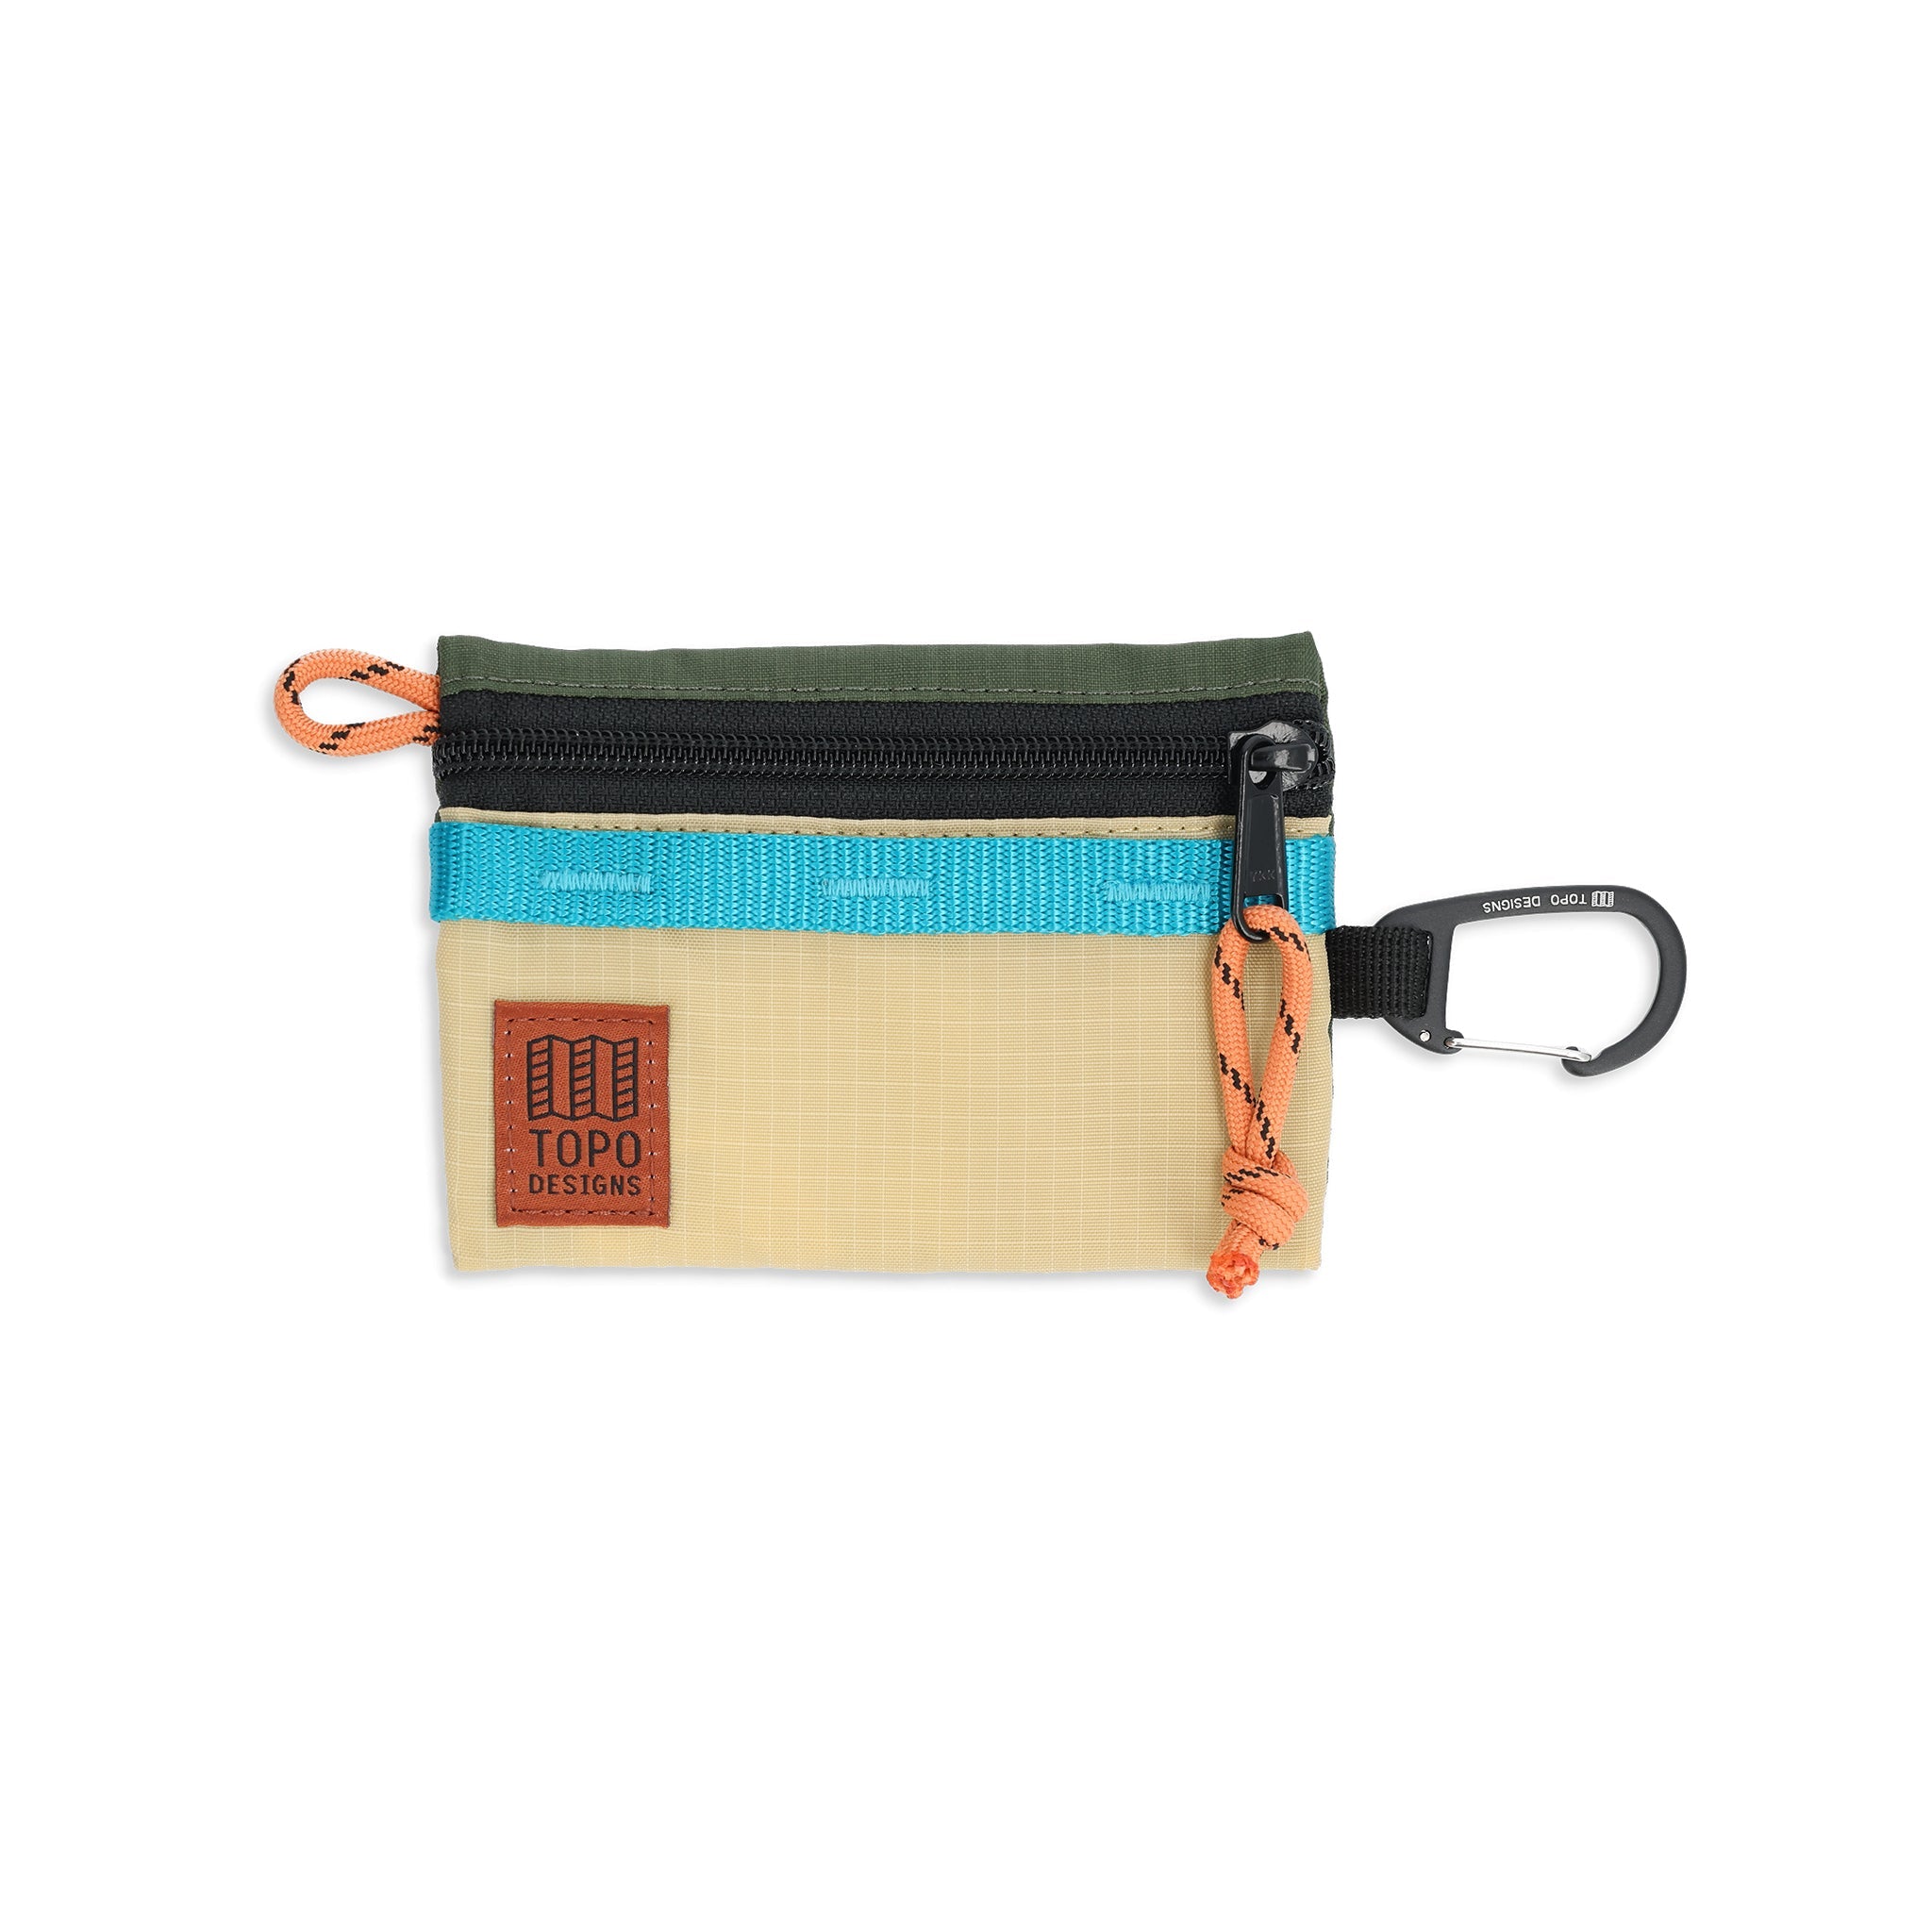 Front View of Topo Designs Mountain Accessory Bag in "Olive / Hemp"